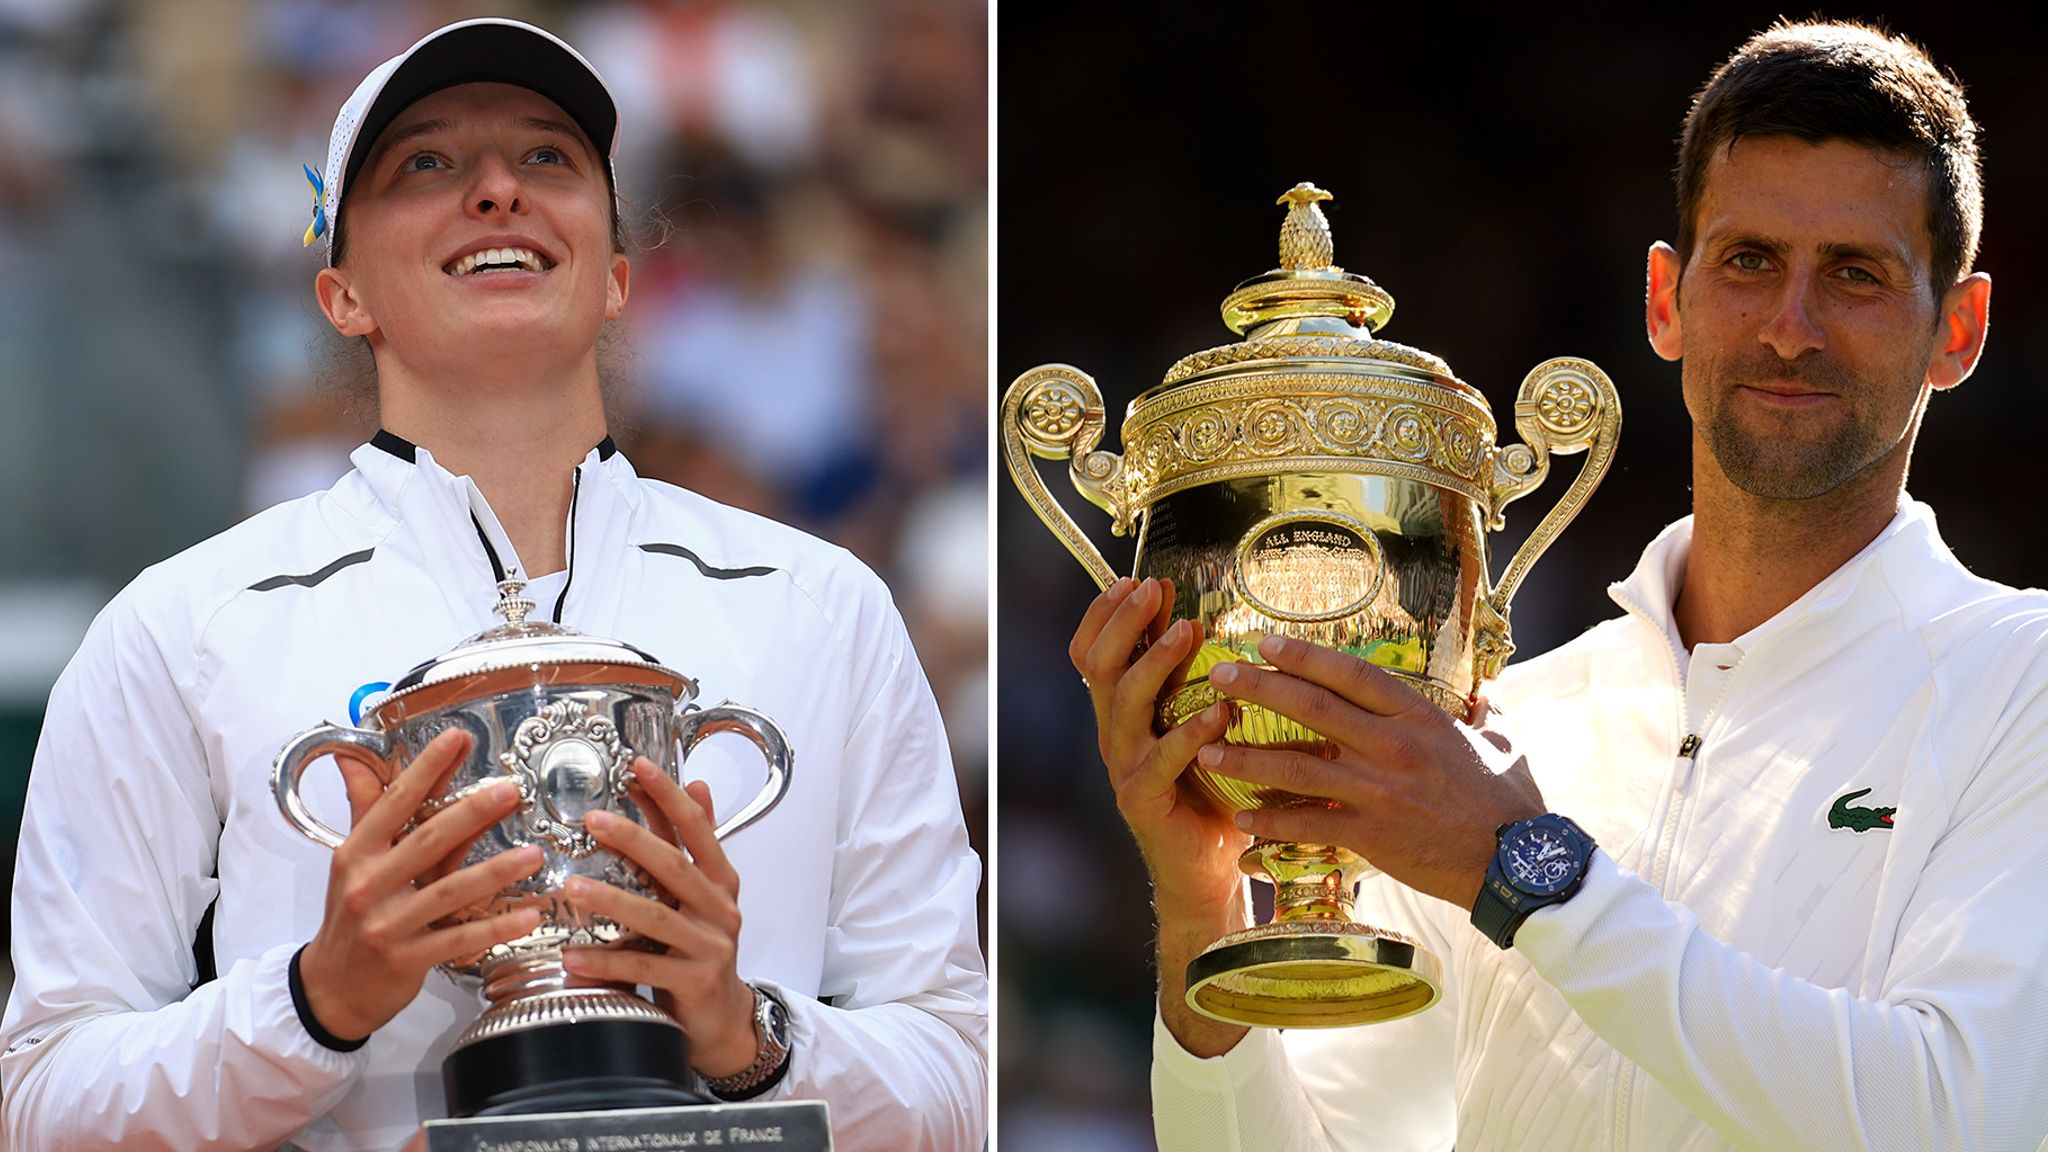 Wimbledon 2023: Schedule, broadcast info, players to watch